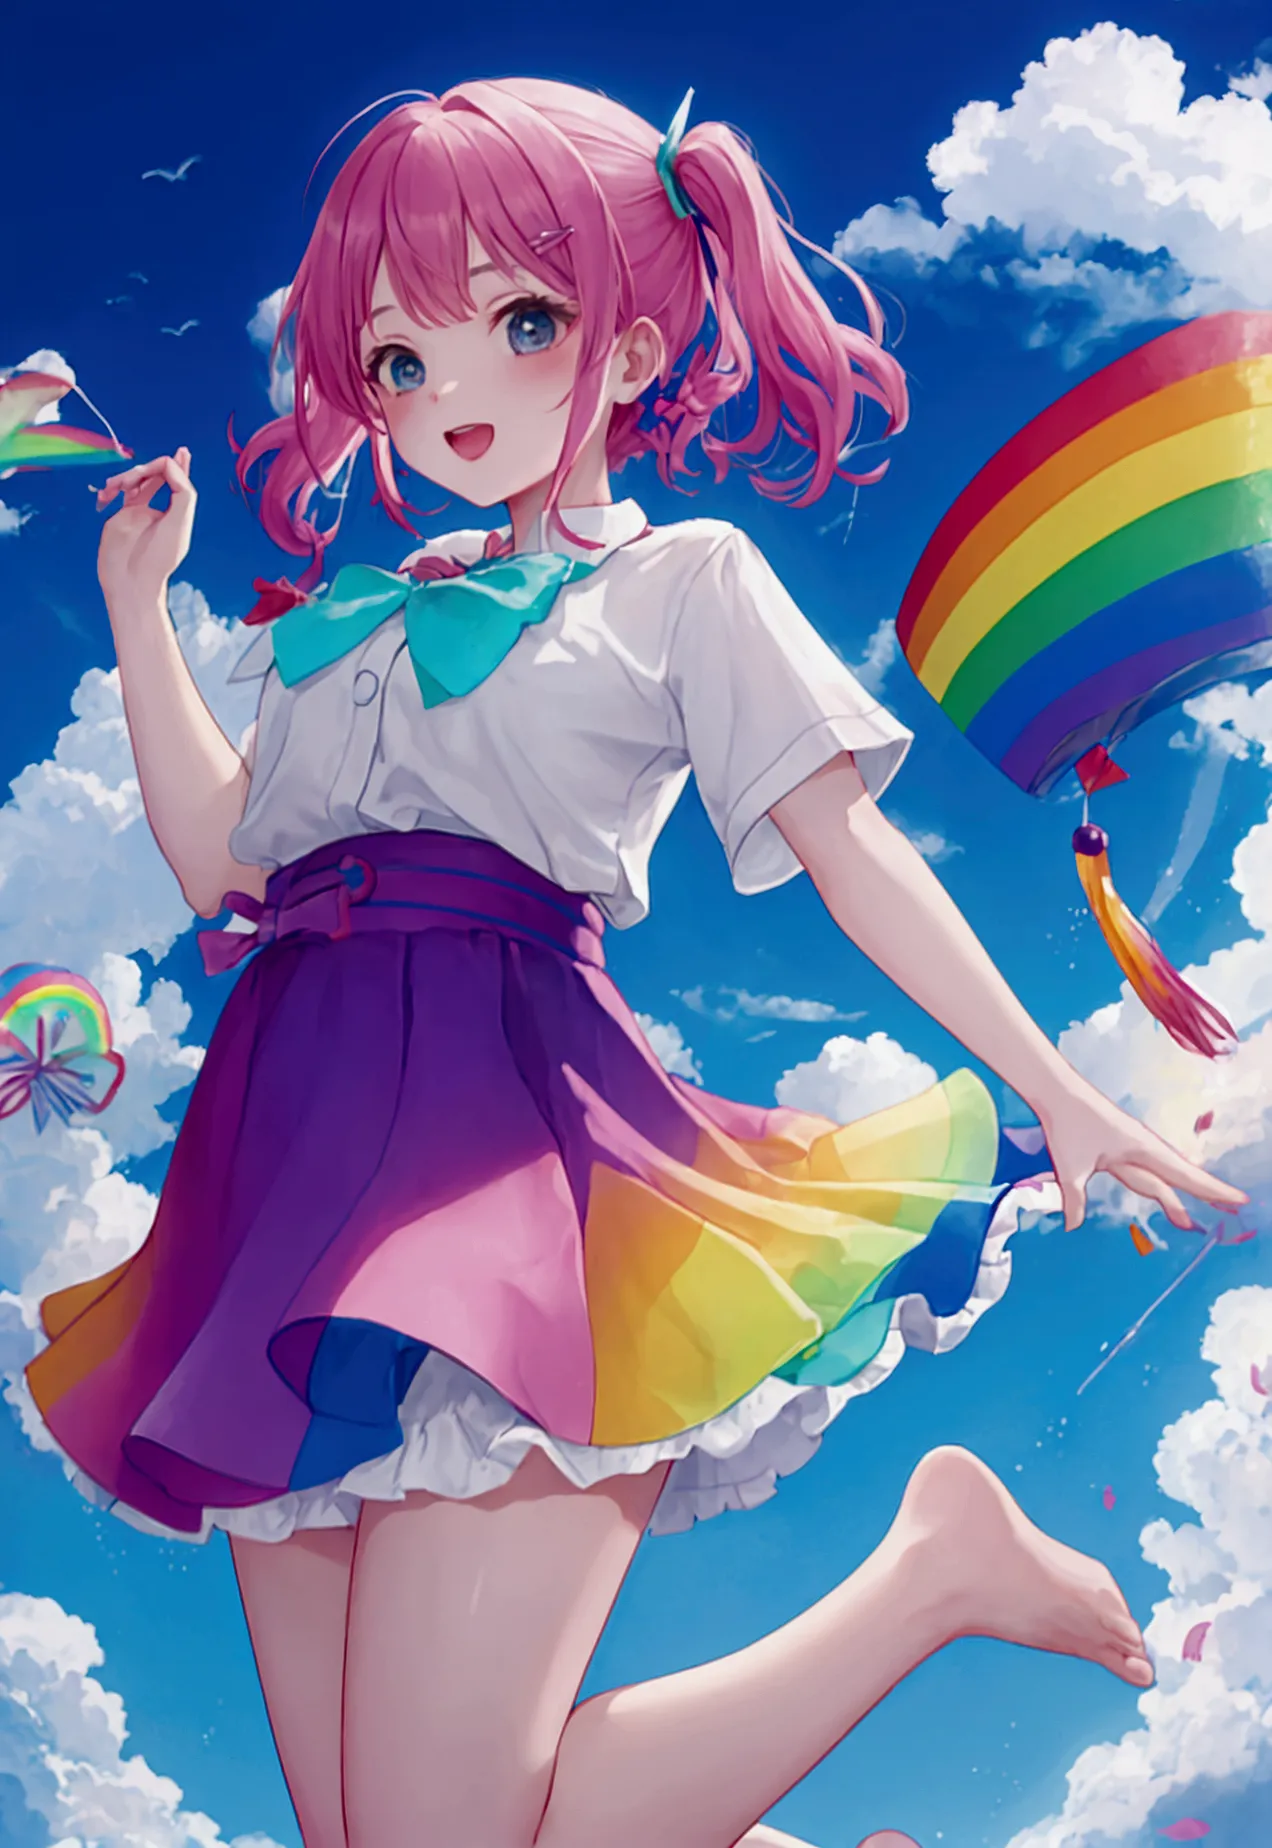 Girl jumping in the rainbow sky